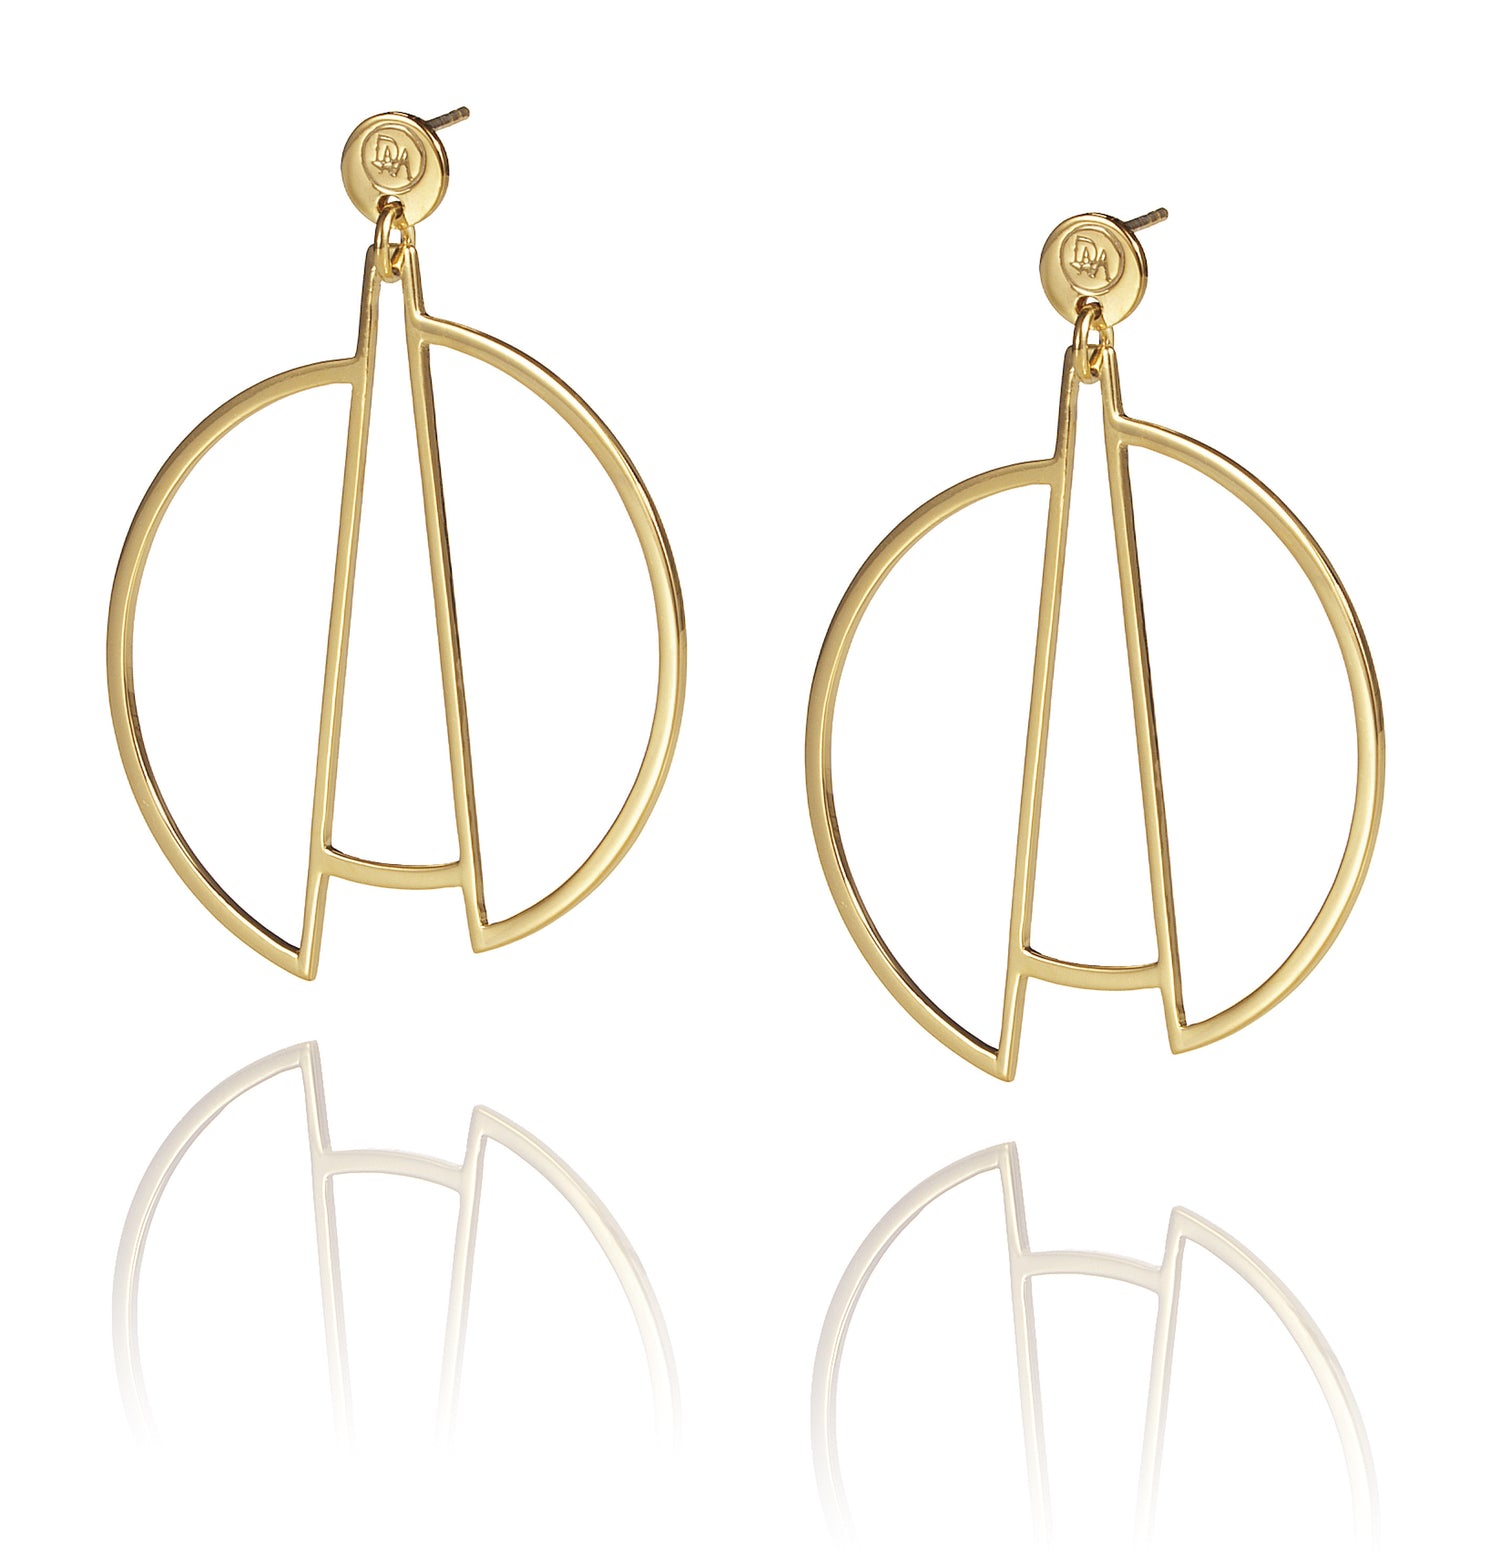 Classy yet edgy earrings from Drift collection. This design represents deconstructed circles and is inspired by the imperfection of life.  Material: 18 karat gold-plated silver.